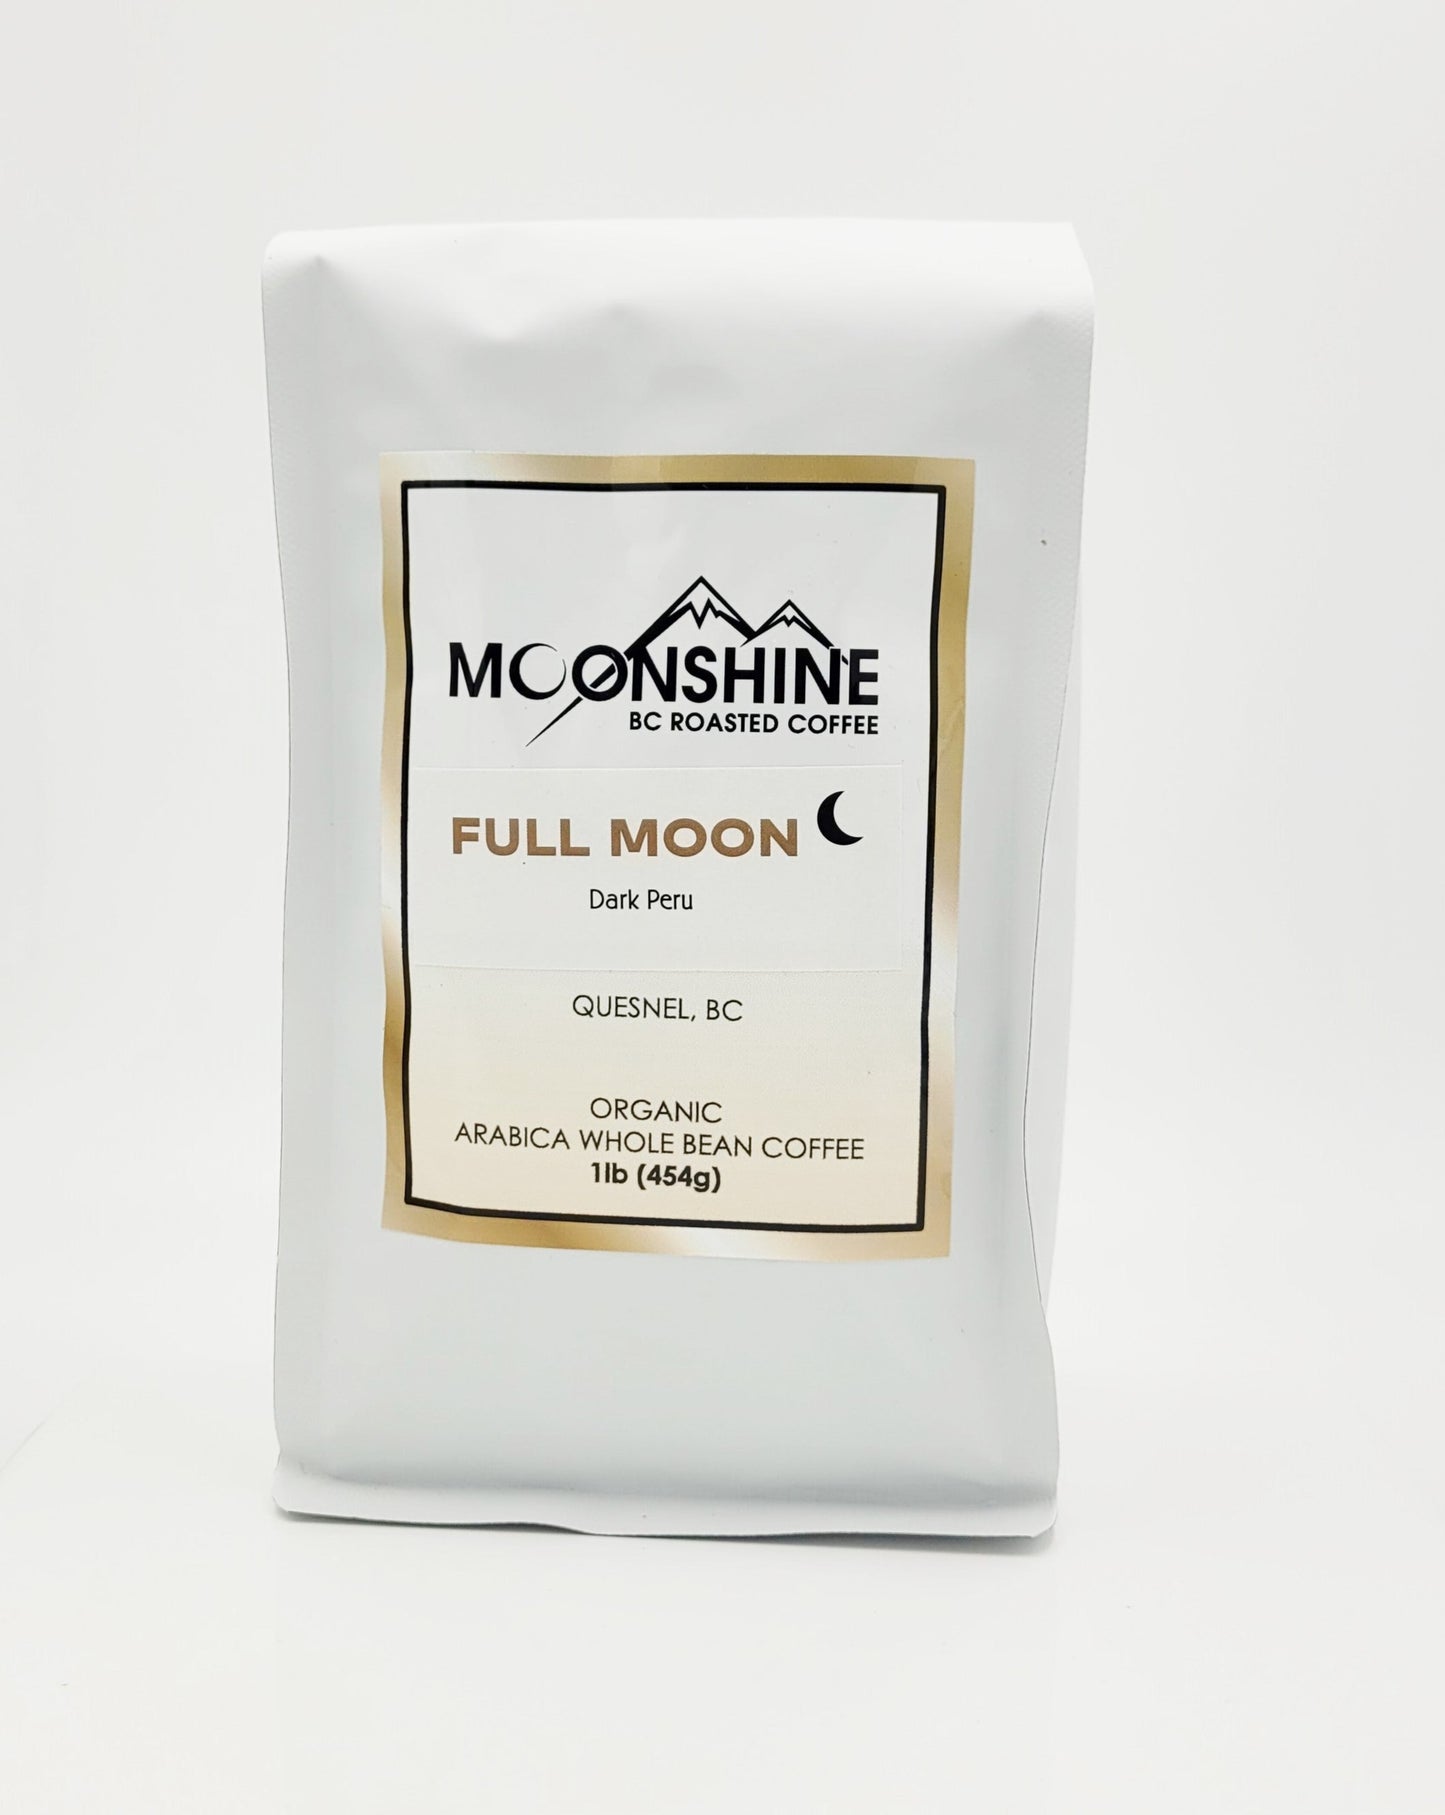 Full Moon is a single origin dark roasted 100% arabica bean from Peru  Moonshine Coffee is a small, artisan, micro-roaster that roasts only organic, fair trade, and direct trade coffee from around the globe.  The roasting is done by hand and in small batches, creating a cup of coffee so good that it should be illegal!   Available Sizes:   1 pound (454g) 1/2 pound (226g)